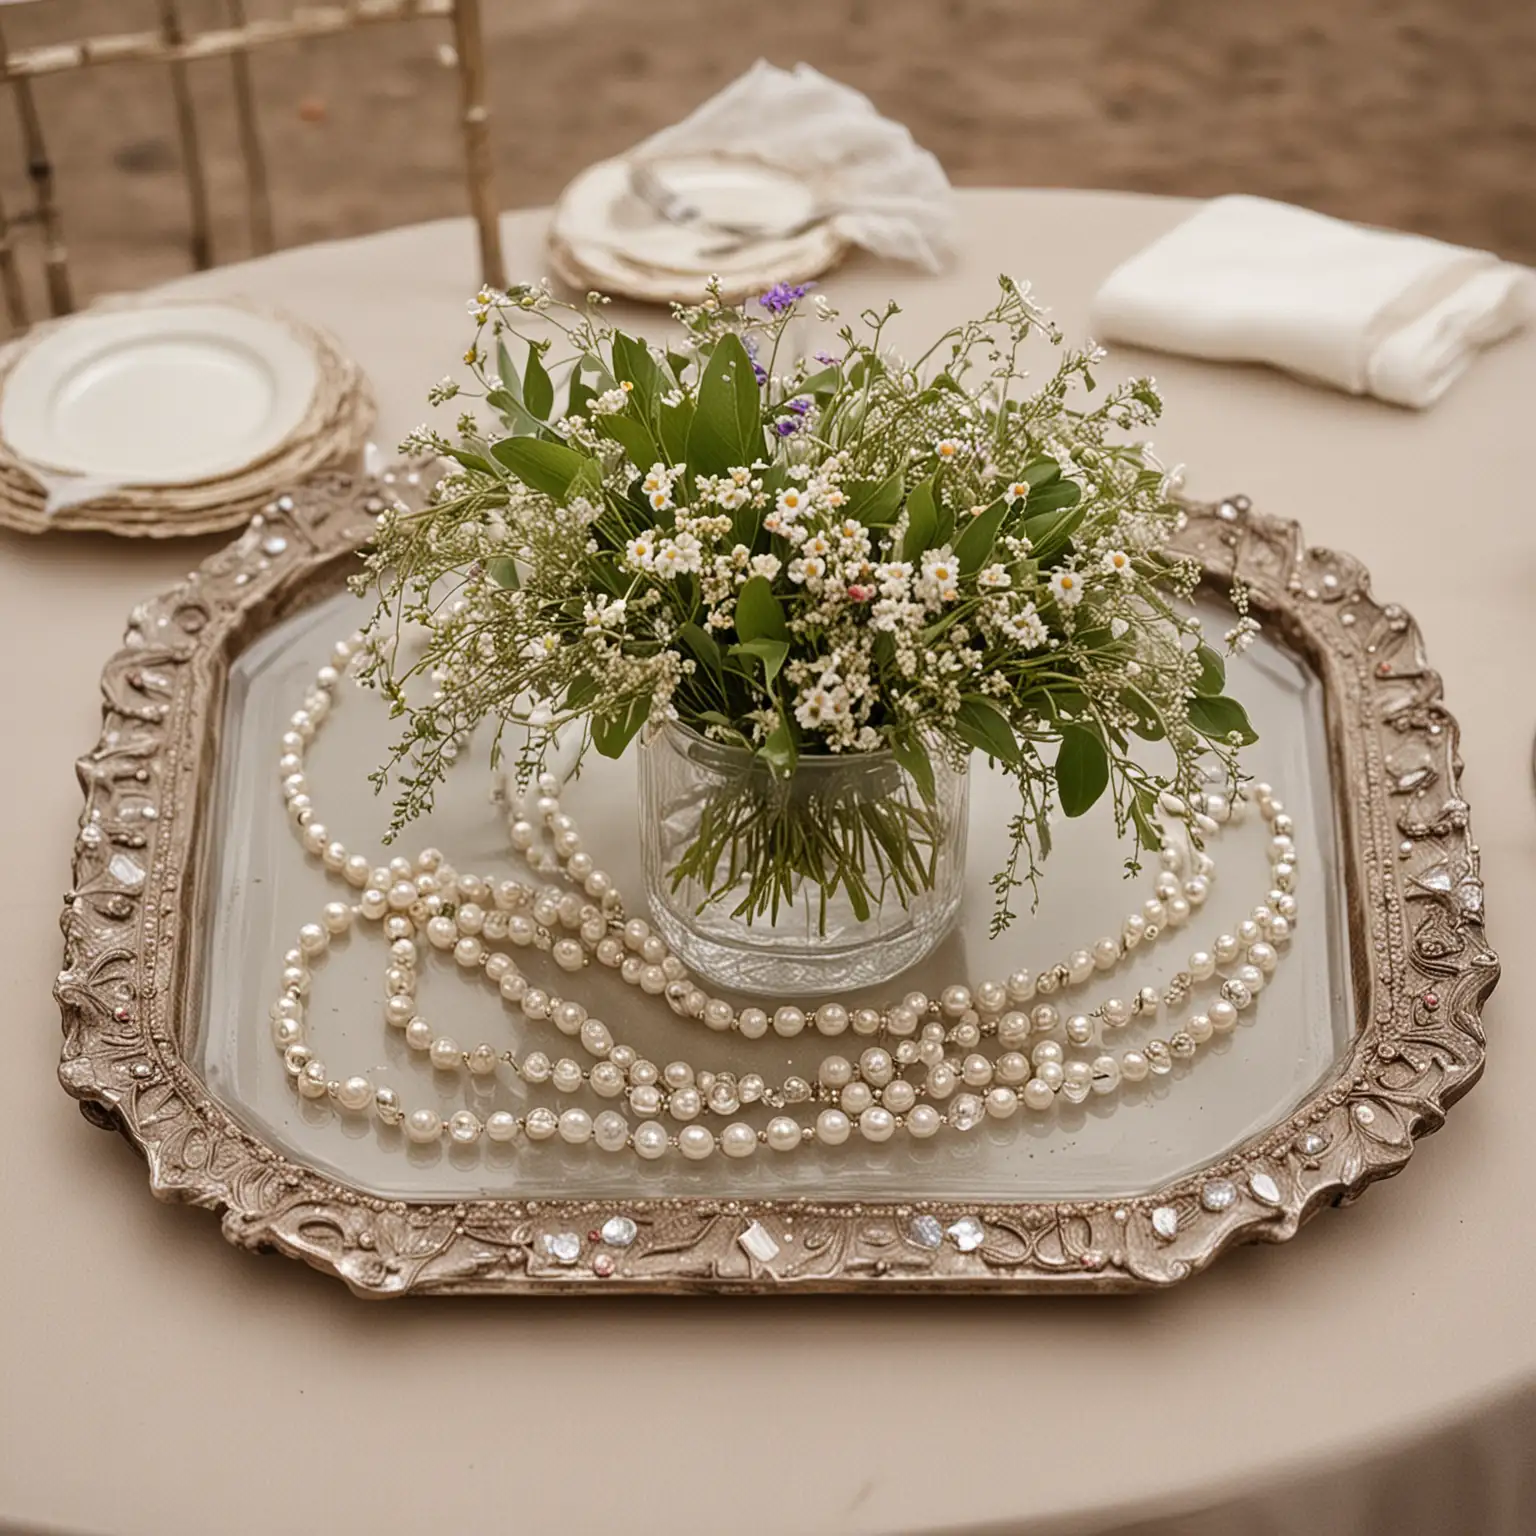 simple diy vintage wedding centerpiece with wildflowers laid on an antique crystal tray and a strand of pearls draped on it; show this from a side view as one would see it sitting at the table and keep the background neutral